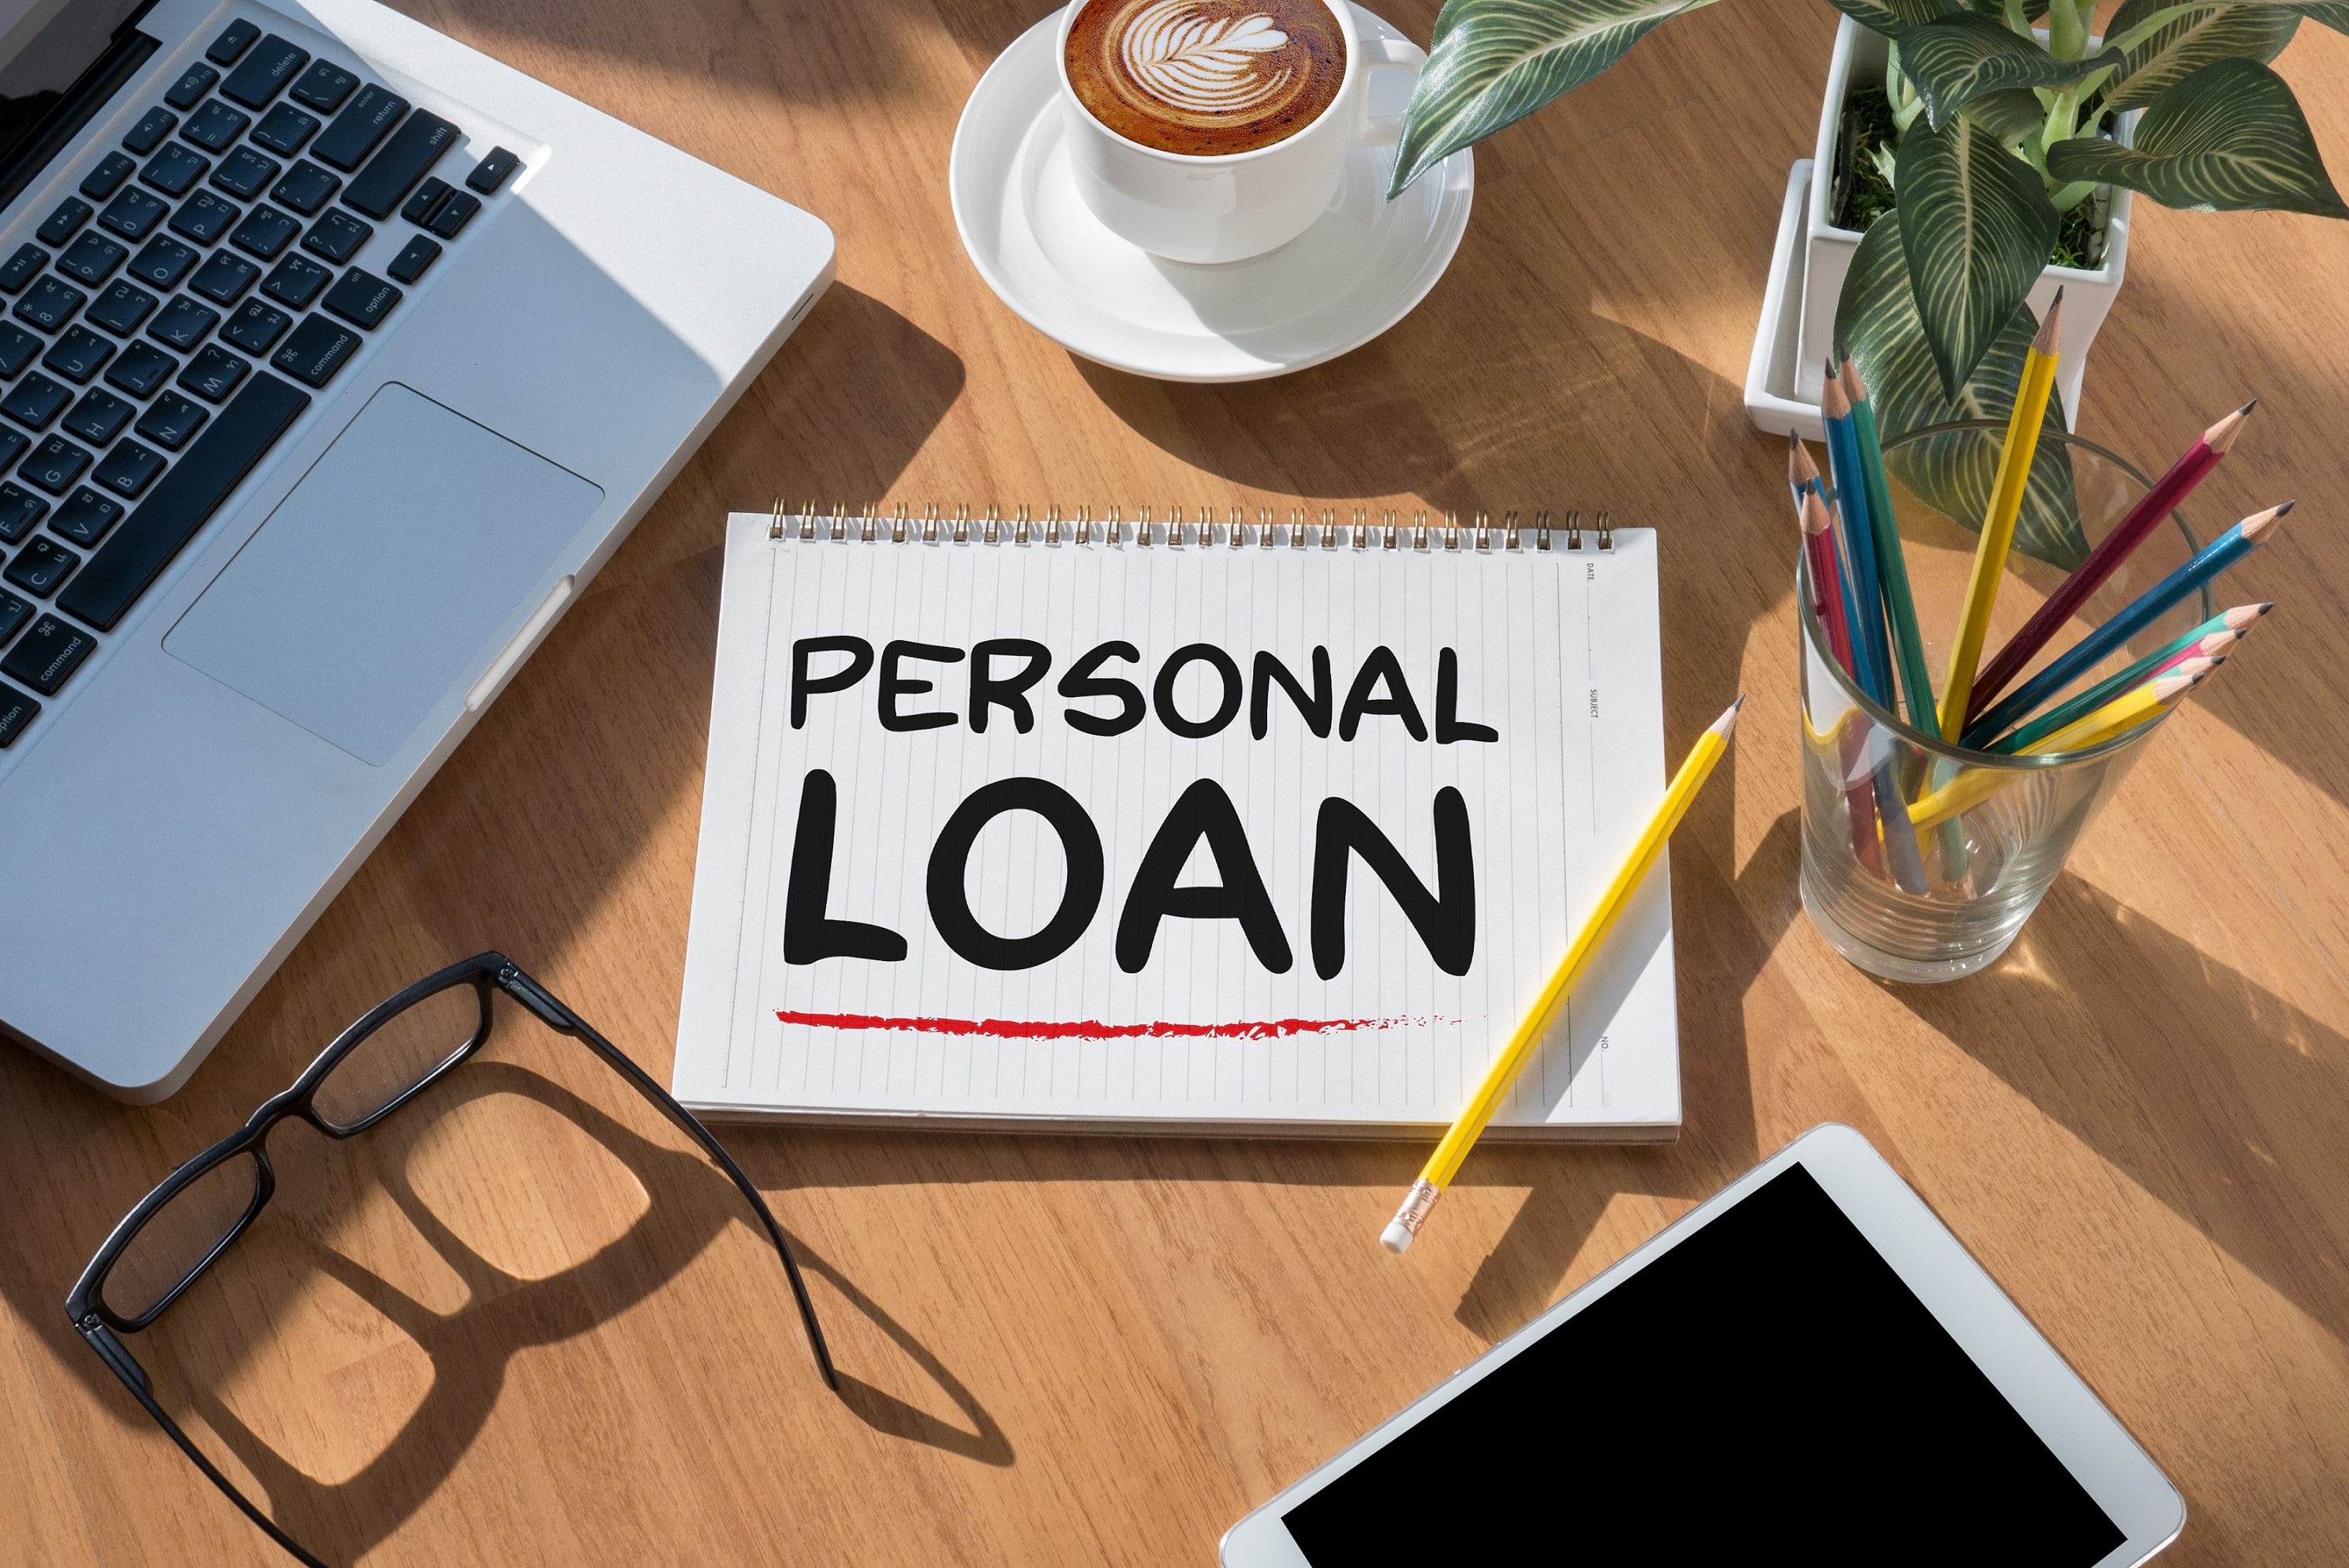 Personal Loans 2021 – Different Loan Types, How Loans Work, How to Qualify, and Where to Get a Loan